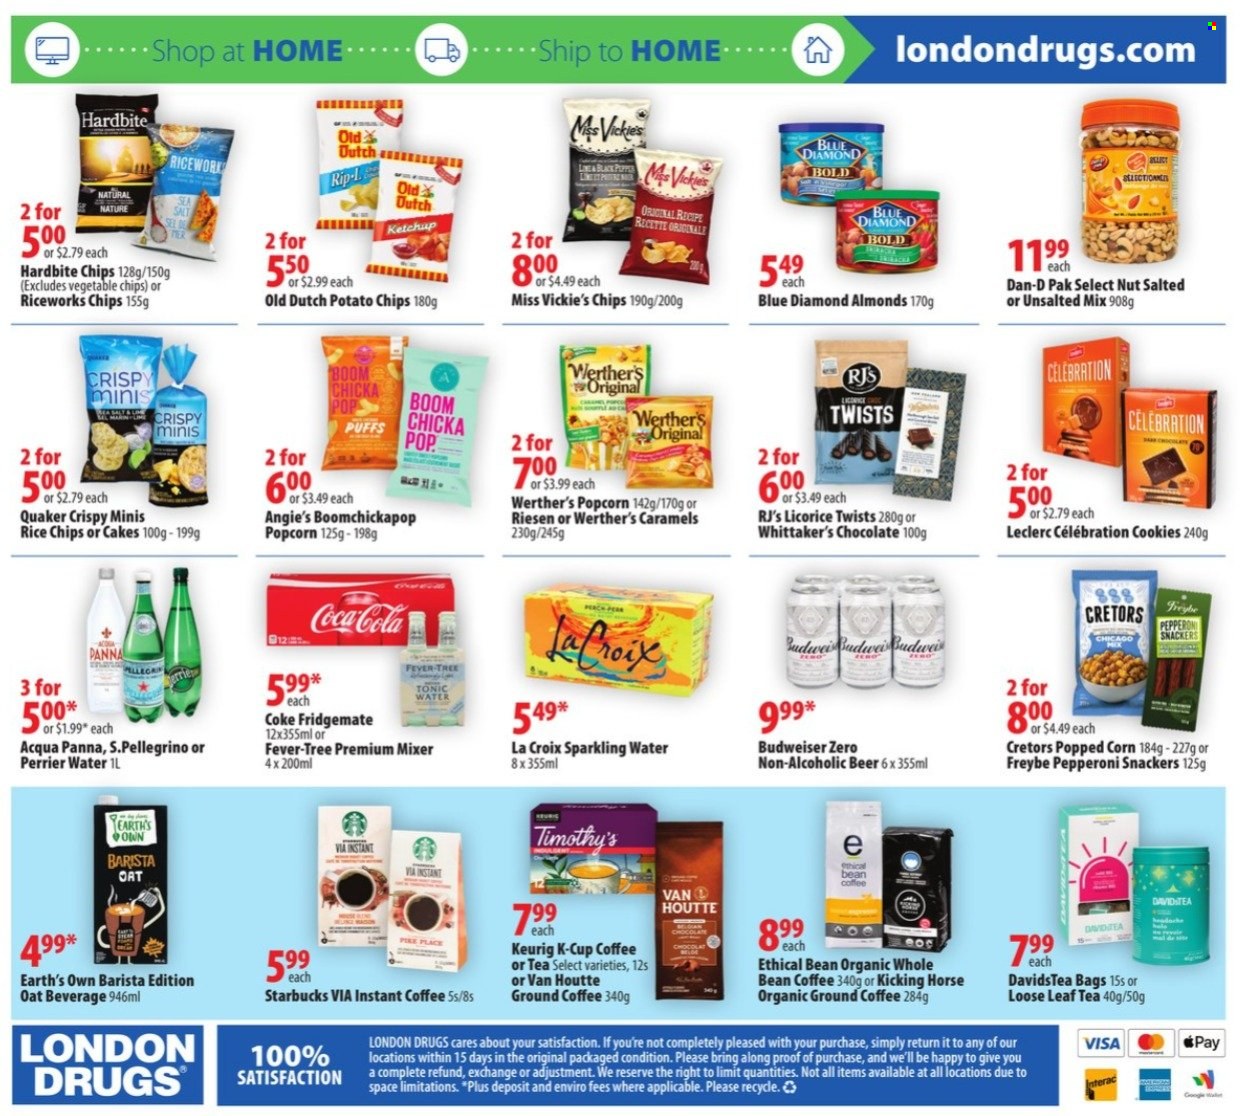 thumbnail - London Drugs Flyer - May 19, 2022 - May 25, 2022 - Sales products - cookies, chocolate, cake, Celebration, Whittaker's, potato chips, chips, popcorn, vegetable chips, oats, corn, puffs, Quaker, Dan-D Pak, almonds, Blue Diamond, Coca-Cola, tonic, Perrier, sparkling water, San Pellegrino, tea, instant coffee, ground coffee, coffee capsules, Starbucks, K-Cups, Keurig, beer, Voom, bag, mixer, Budweiser, ketchup. Page 16.